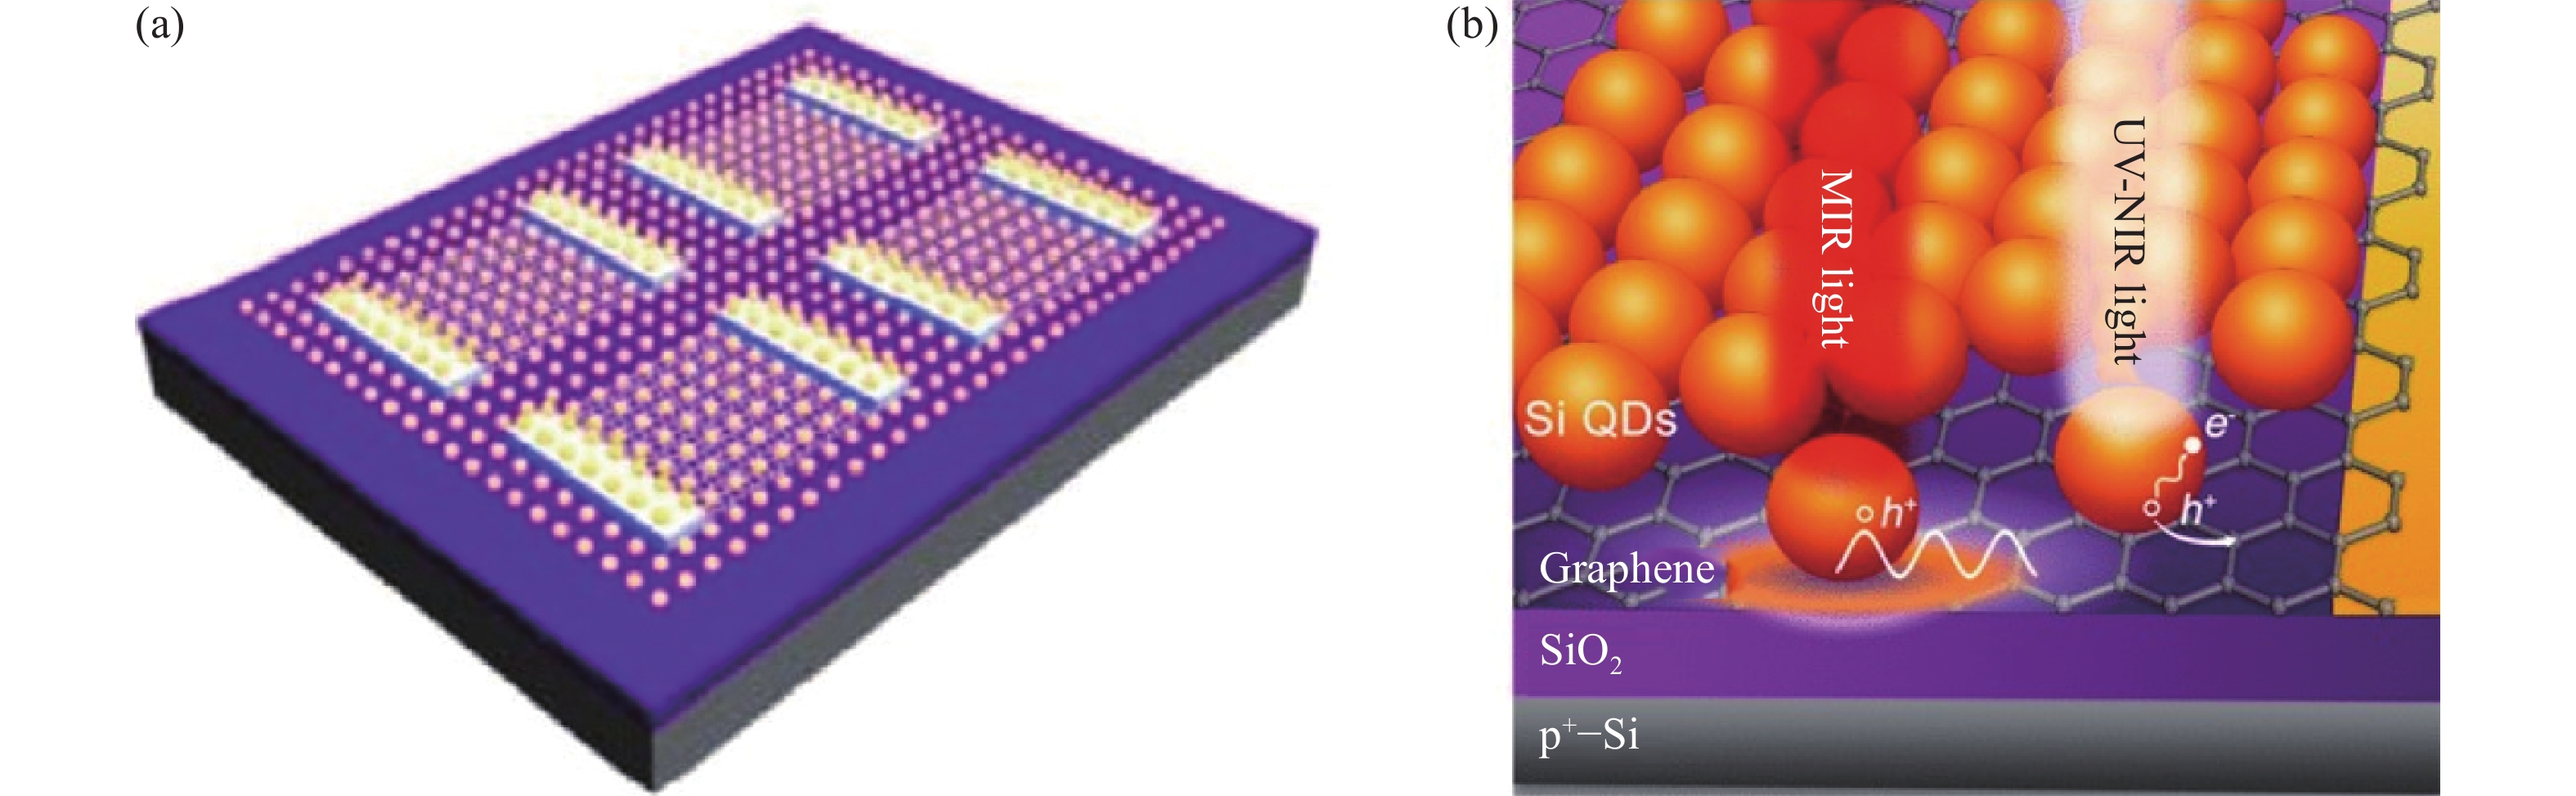 Typical structure of graphene detector based on plasmon resonance filed enhancement. （a） Structural diagram of the graphene/gold nanoparticle photodetector[13]; （b） Structural diagram of the graphene/Si QDs phototransistor[14]